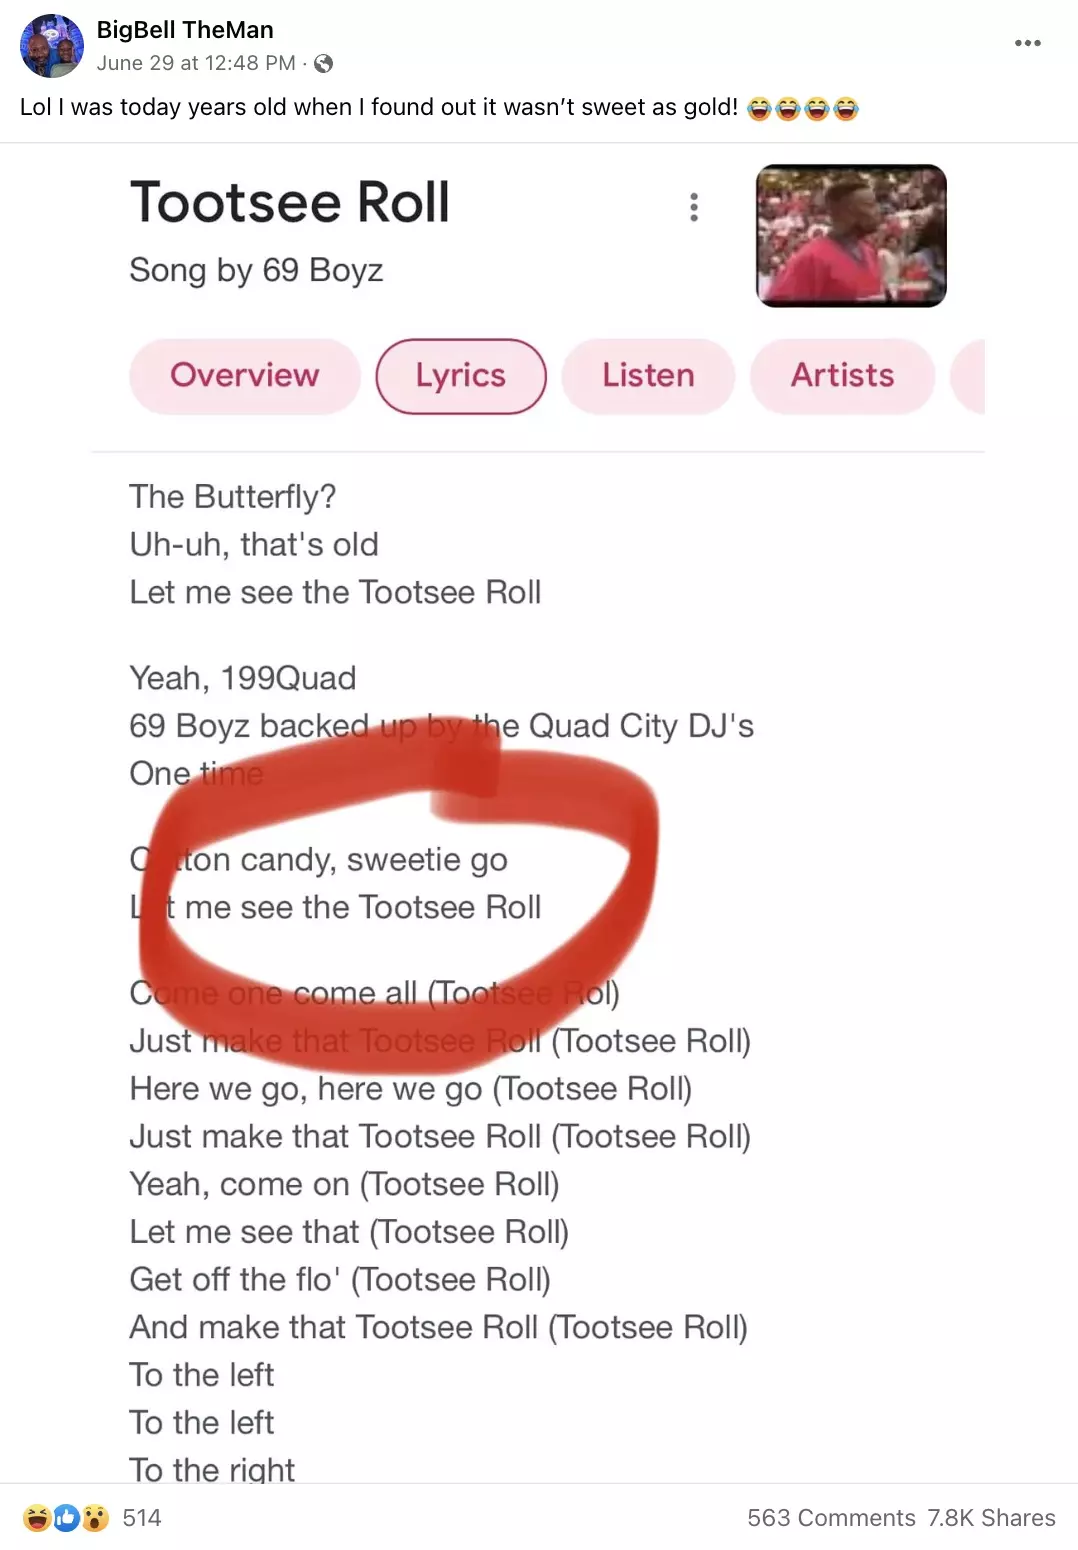 Love korn, but what's with these lyrics lol : r/Korn